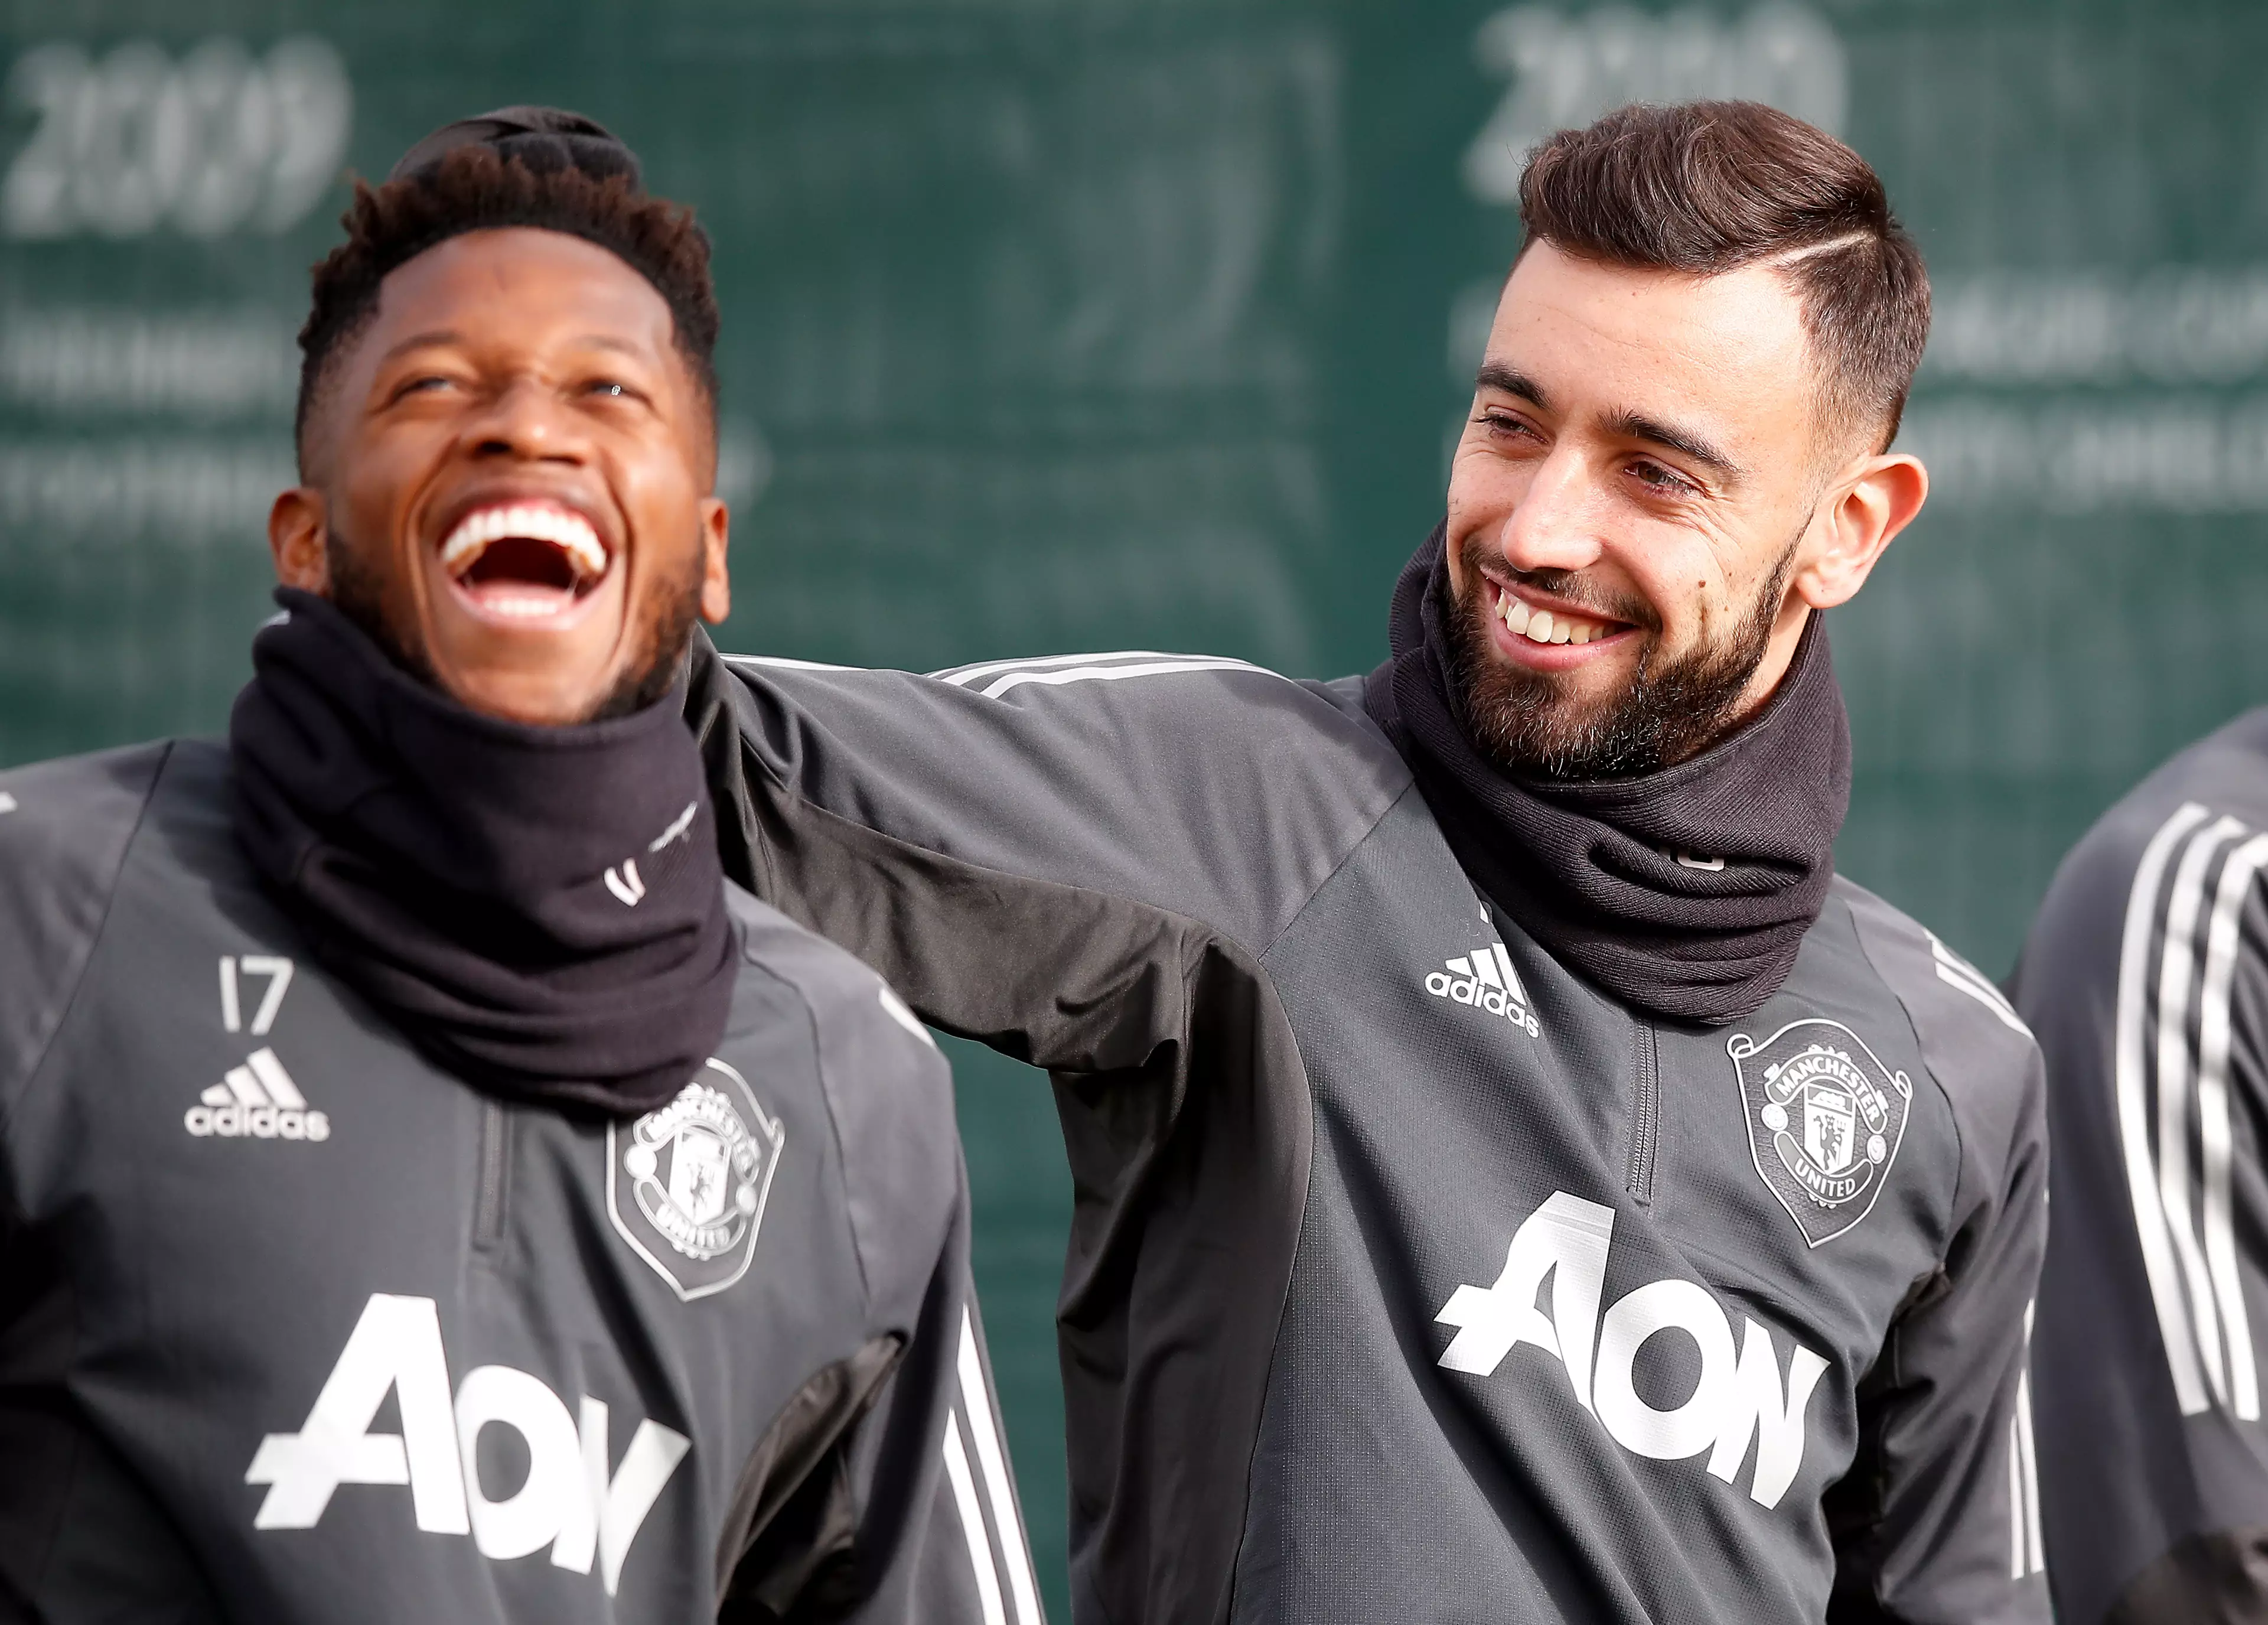 Fernandes is already well liked at Old Trafford by fans and players alike. Image: PA Images